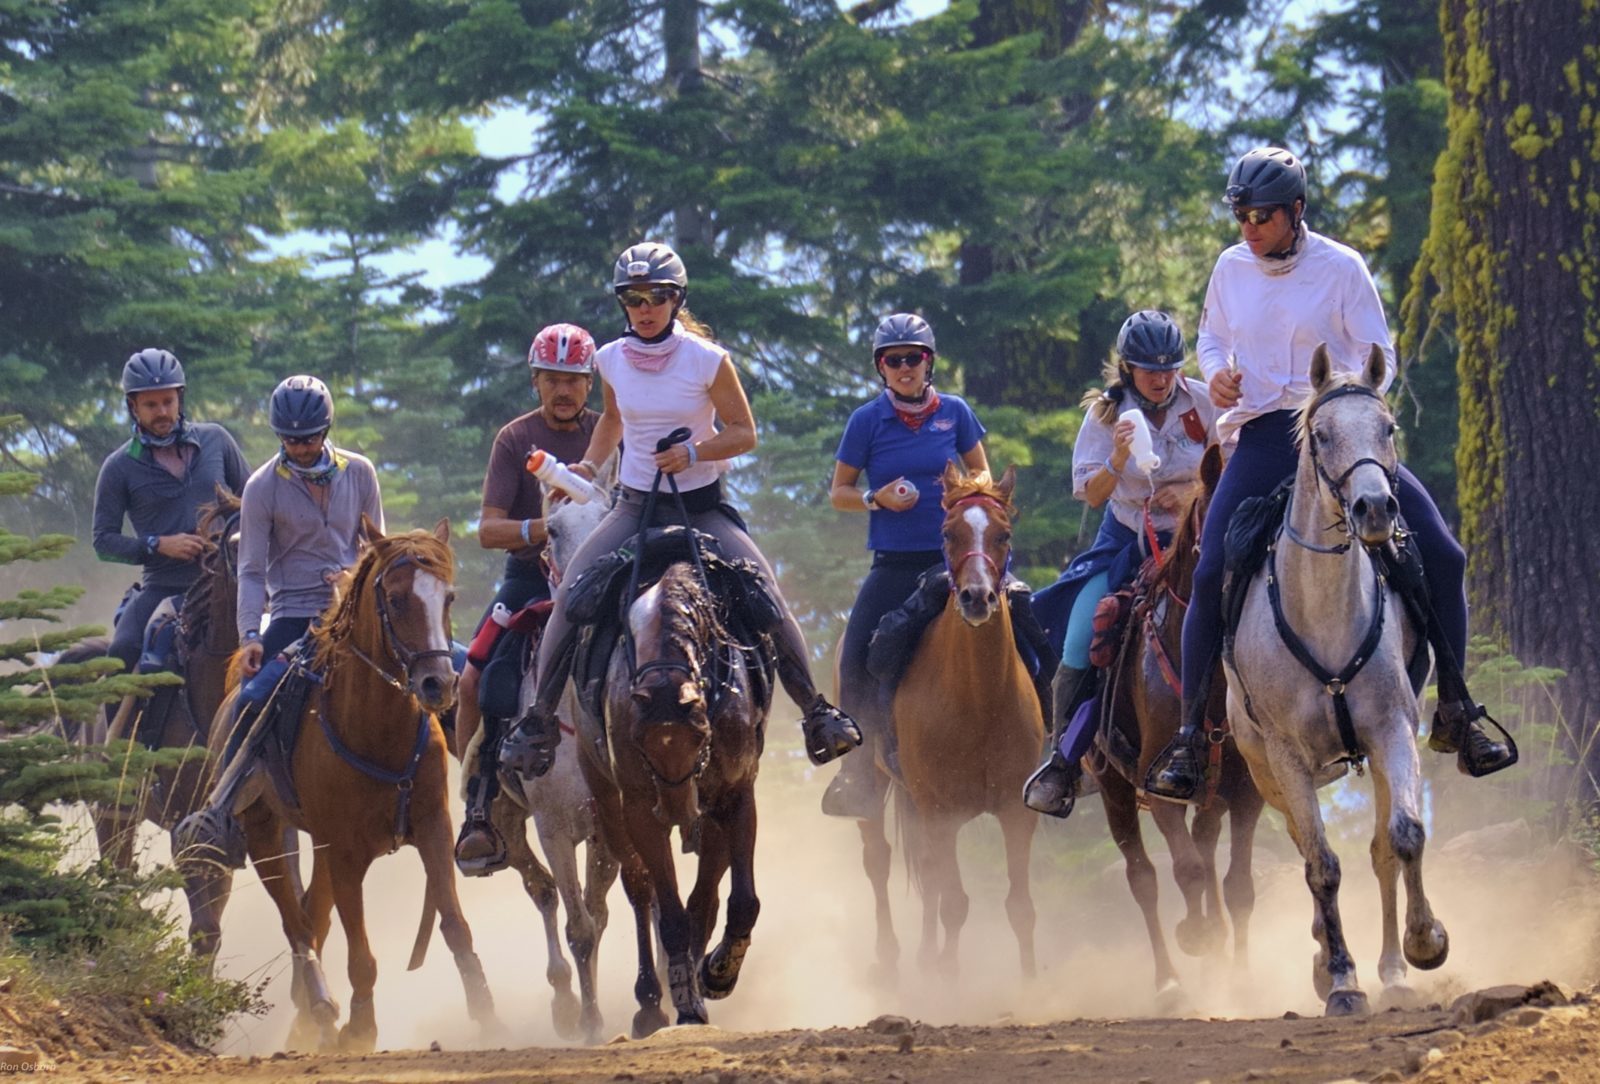 100-Mile Tevis Cup: One of the Top Ten Endurance Competitions in the World!  - EasyCare Hoof Boot News